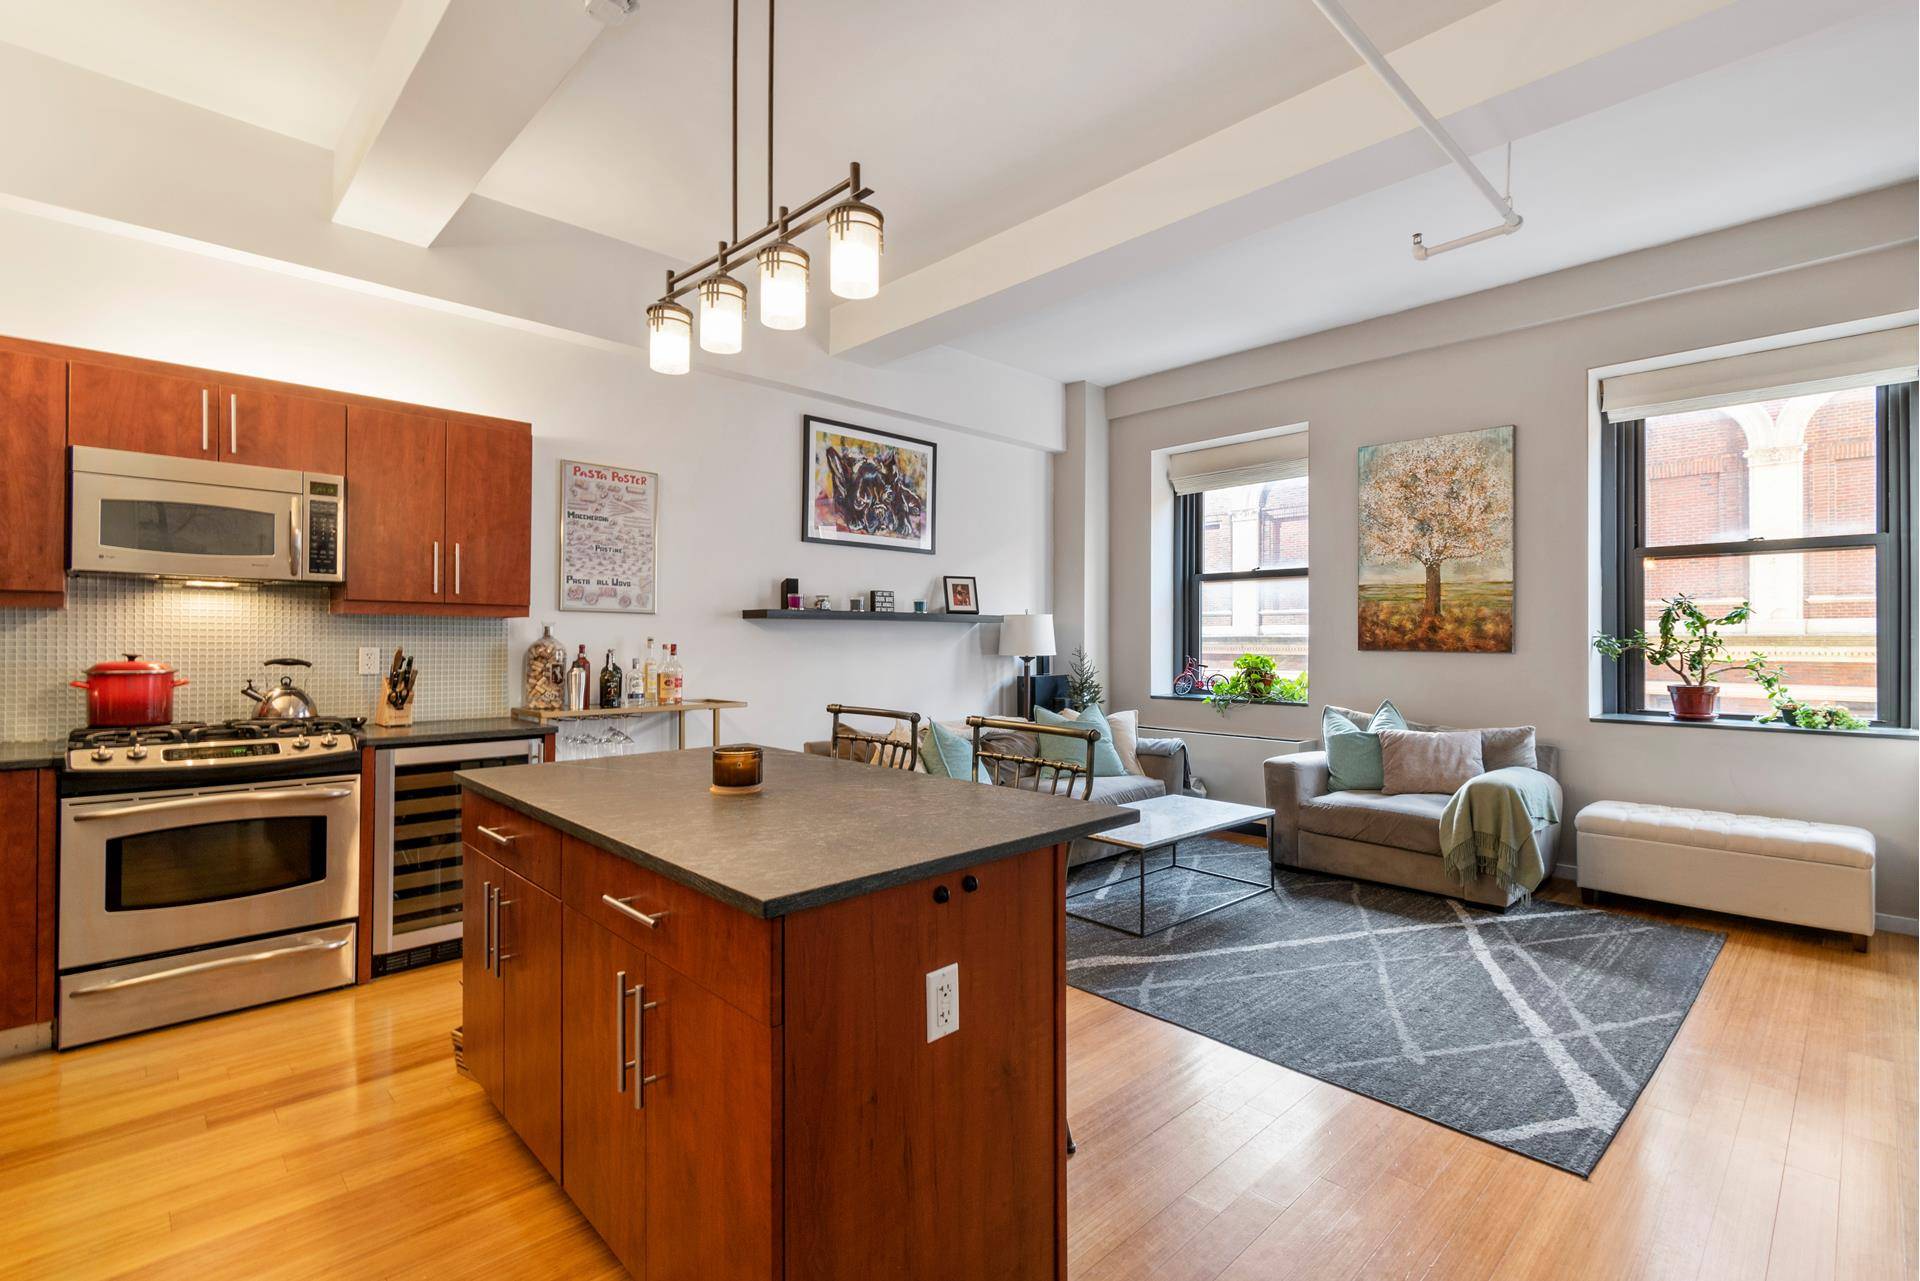 Come home to this spacious 1, 175 sqft 2 bedroom home at Belltel Lofts.